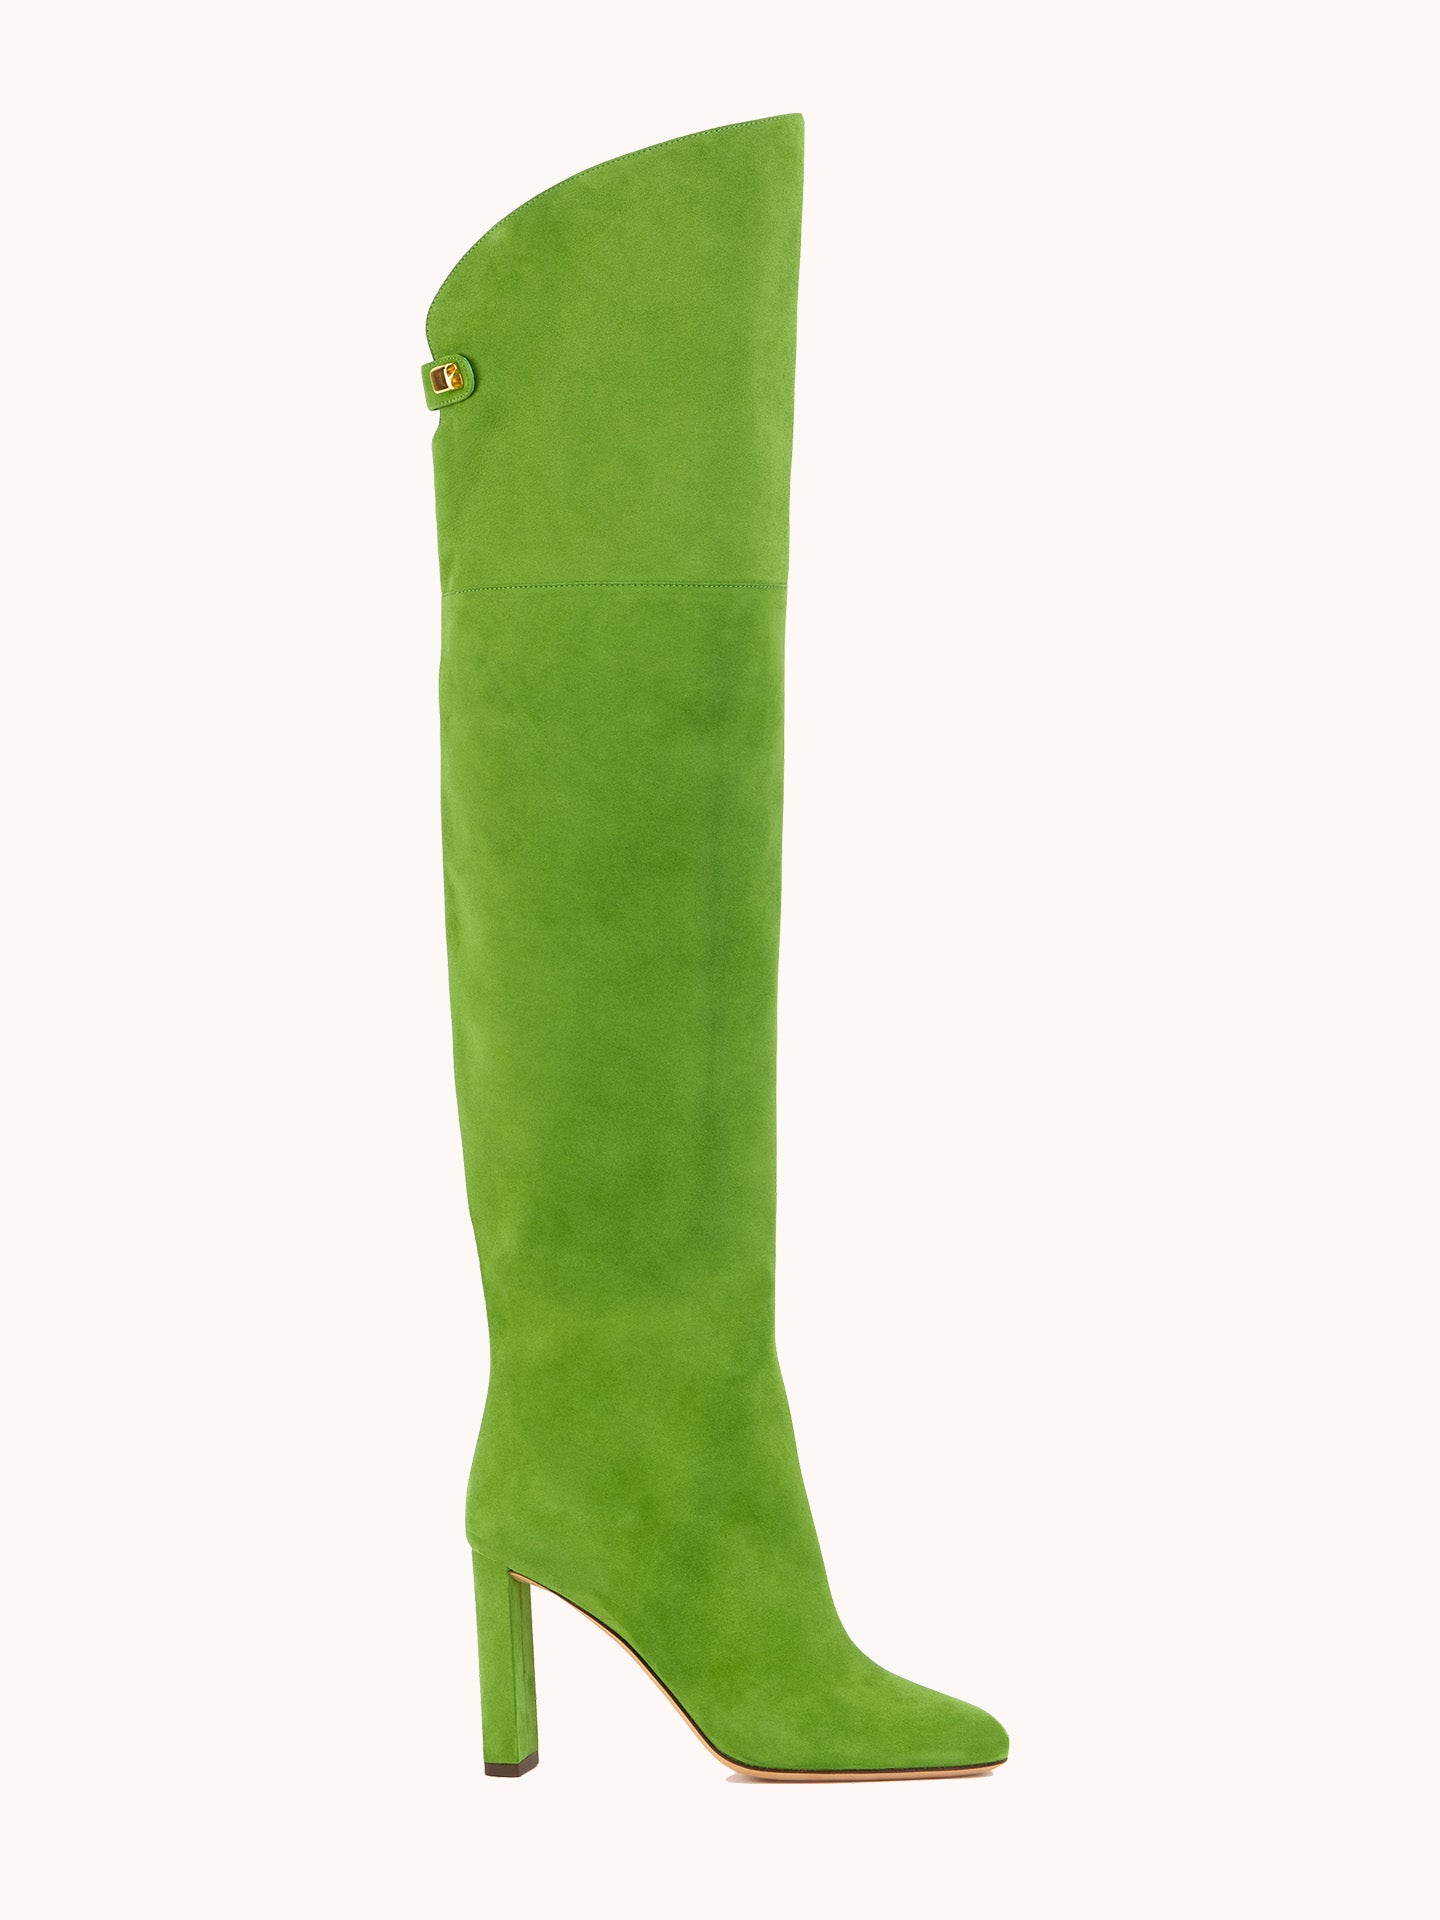 Marylin Over The Knee Apple Green Suede Boots